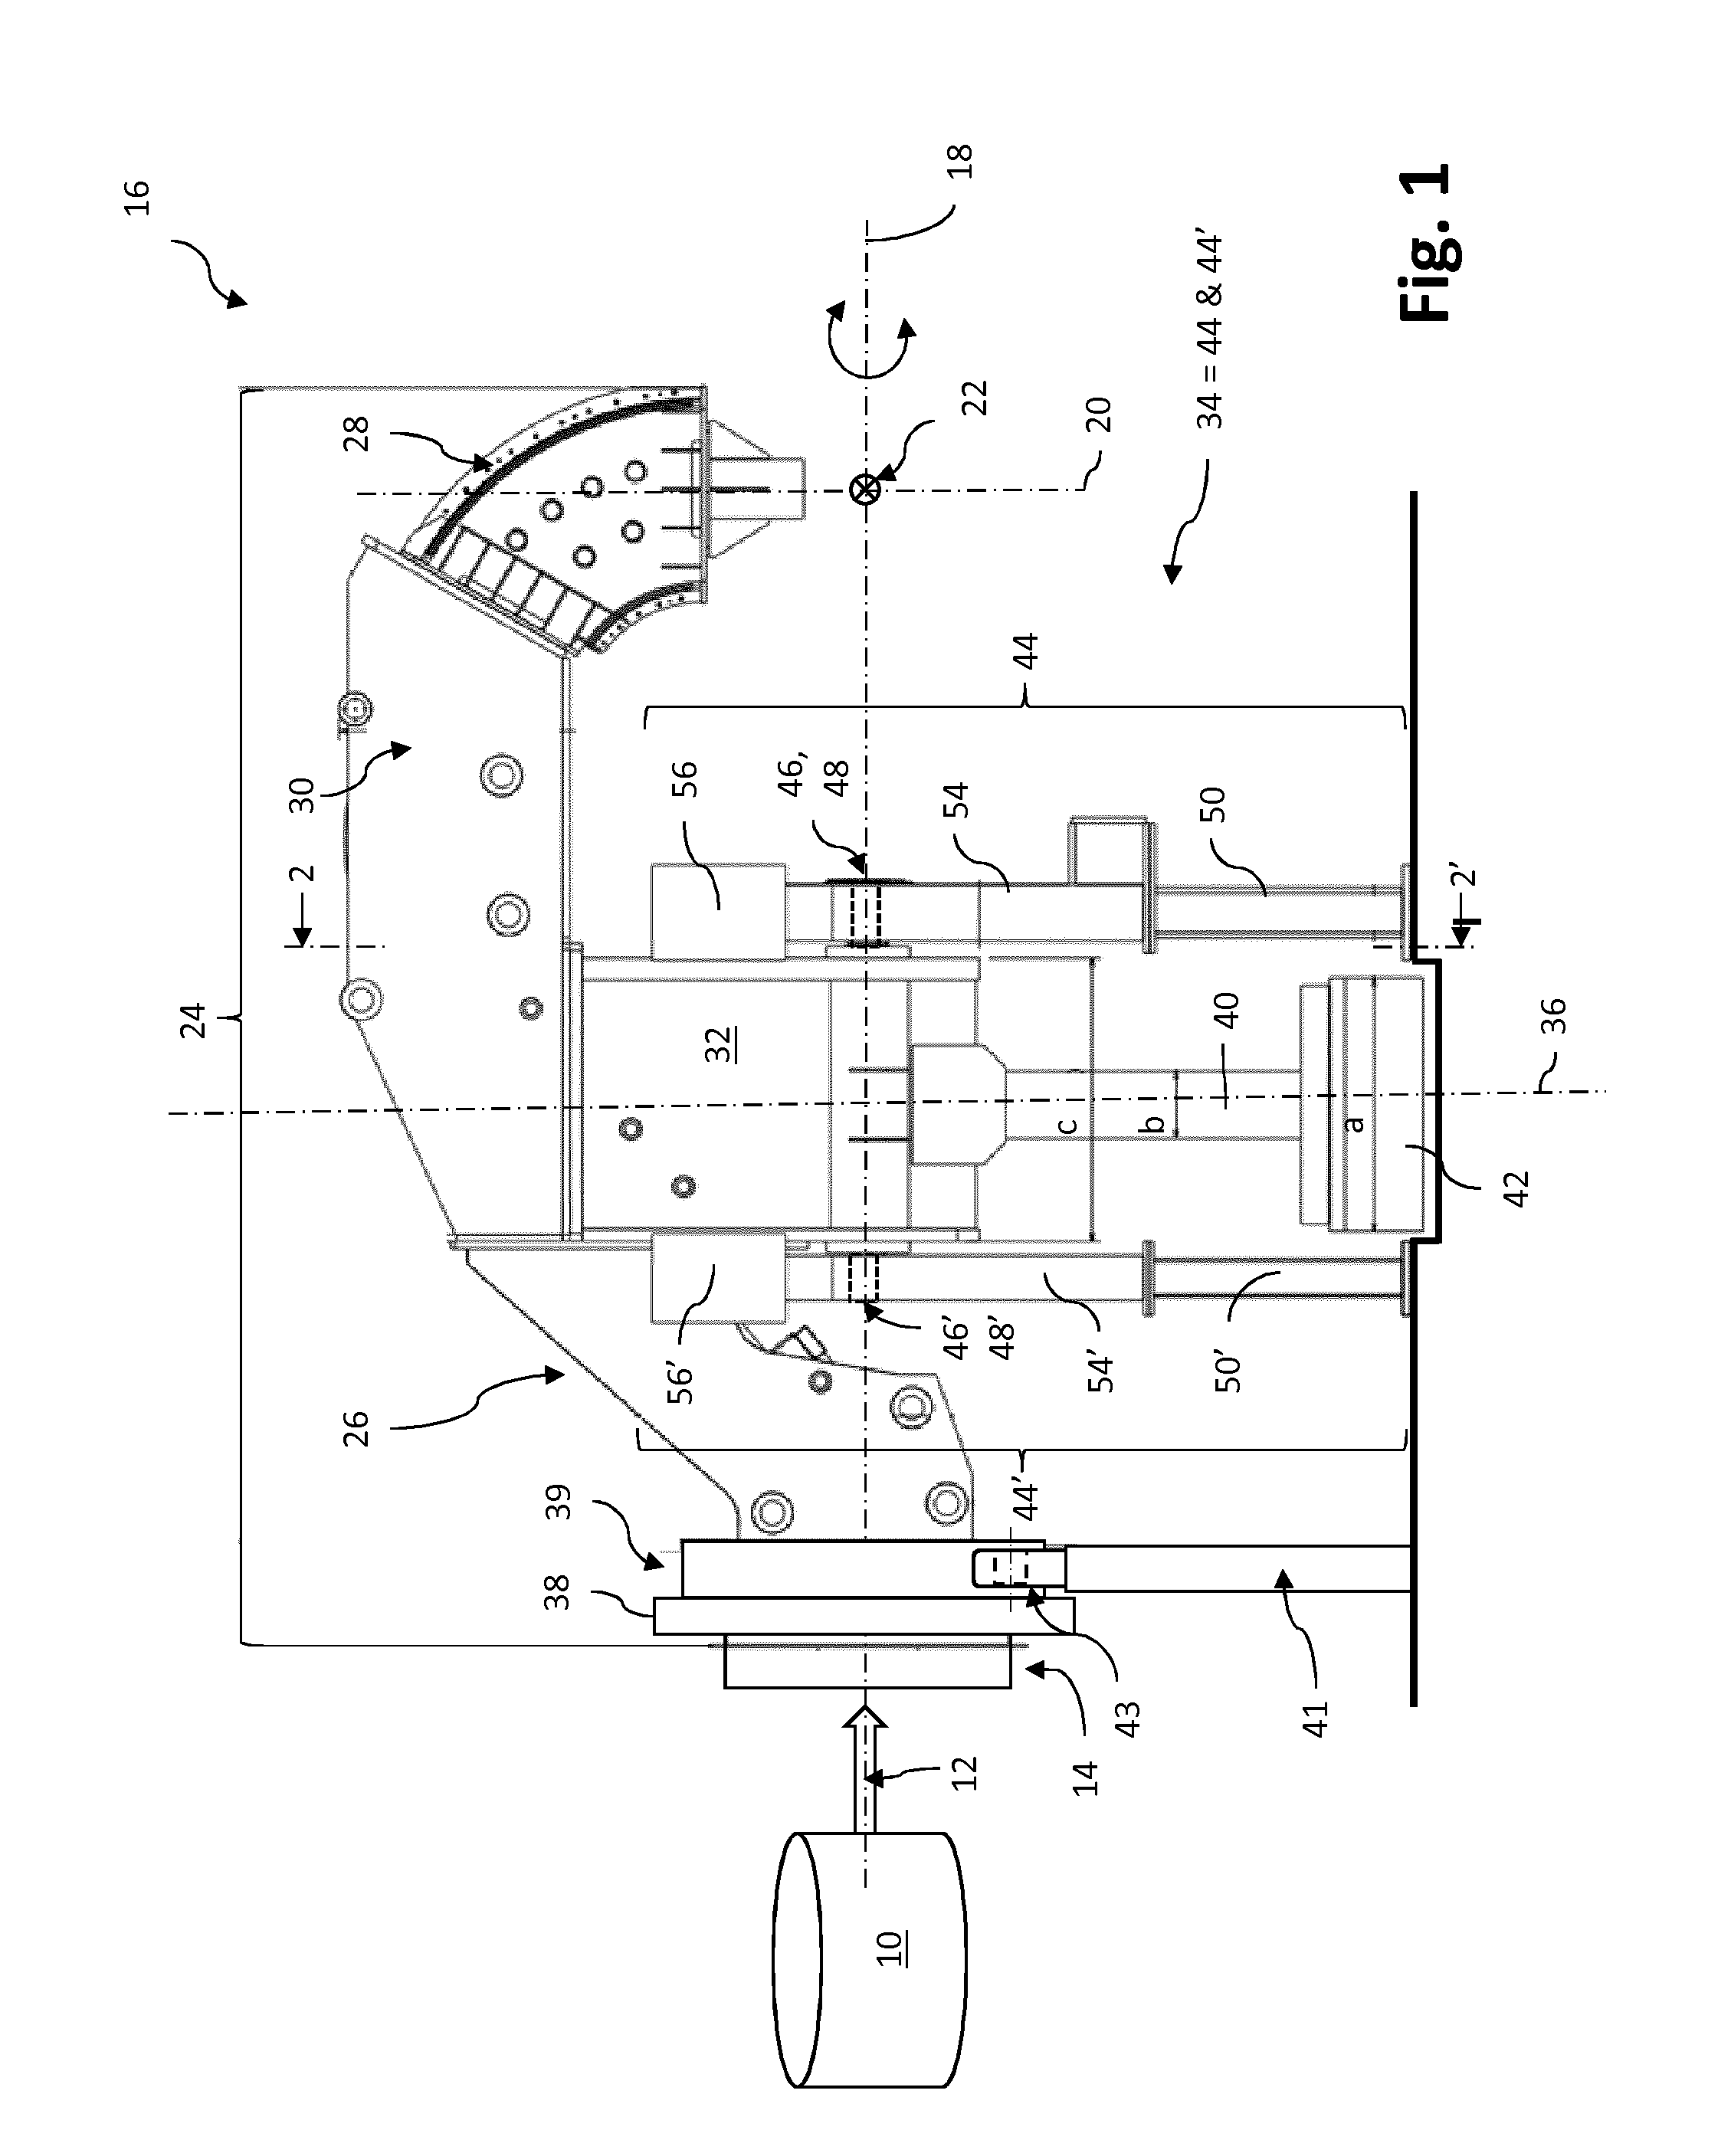 Gantry Structure For A Hadron Therapy Apparatus